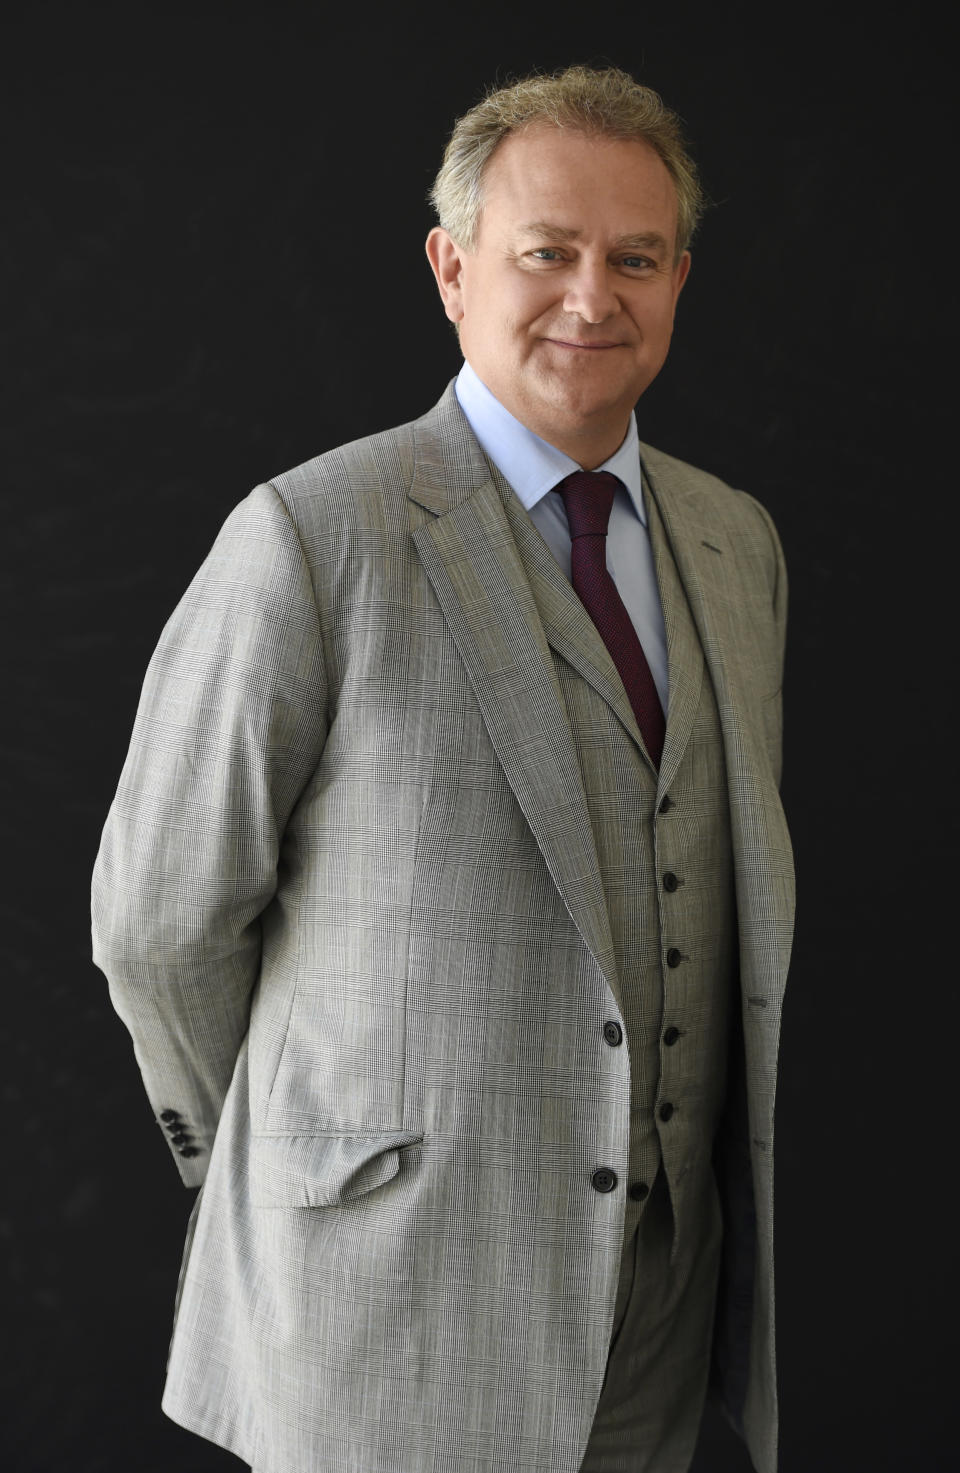 Hugh Bonneville, a cast member in the PBS series "Downton Abbey," poses for a portrait during the 2015 Television Critics Association Summer Press Tour at the Beverly Hilton on Saturday, Aug. 1, 2015, in Beverly Hills, Calif. (Photo by Chris Pizzello/Invision/AP)